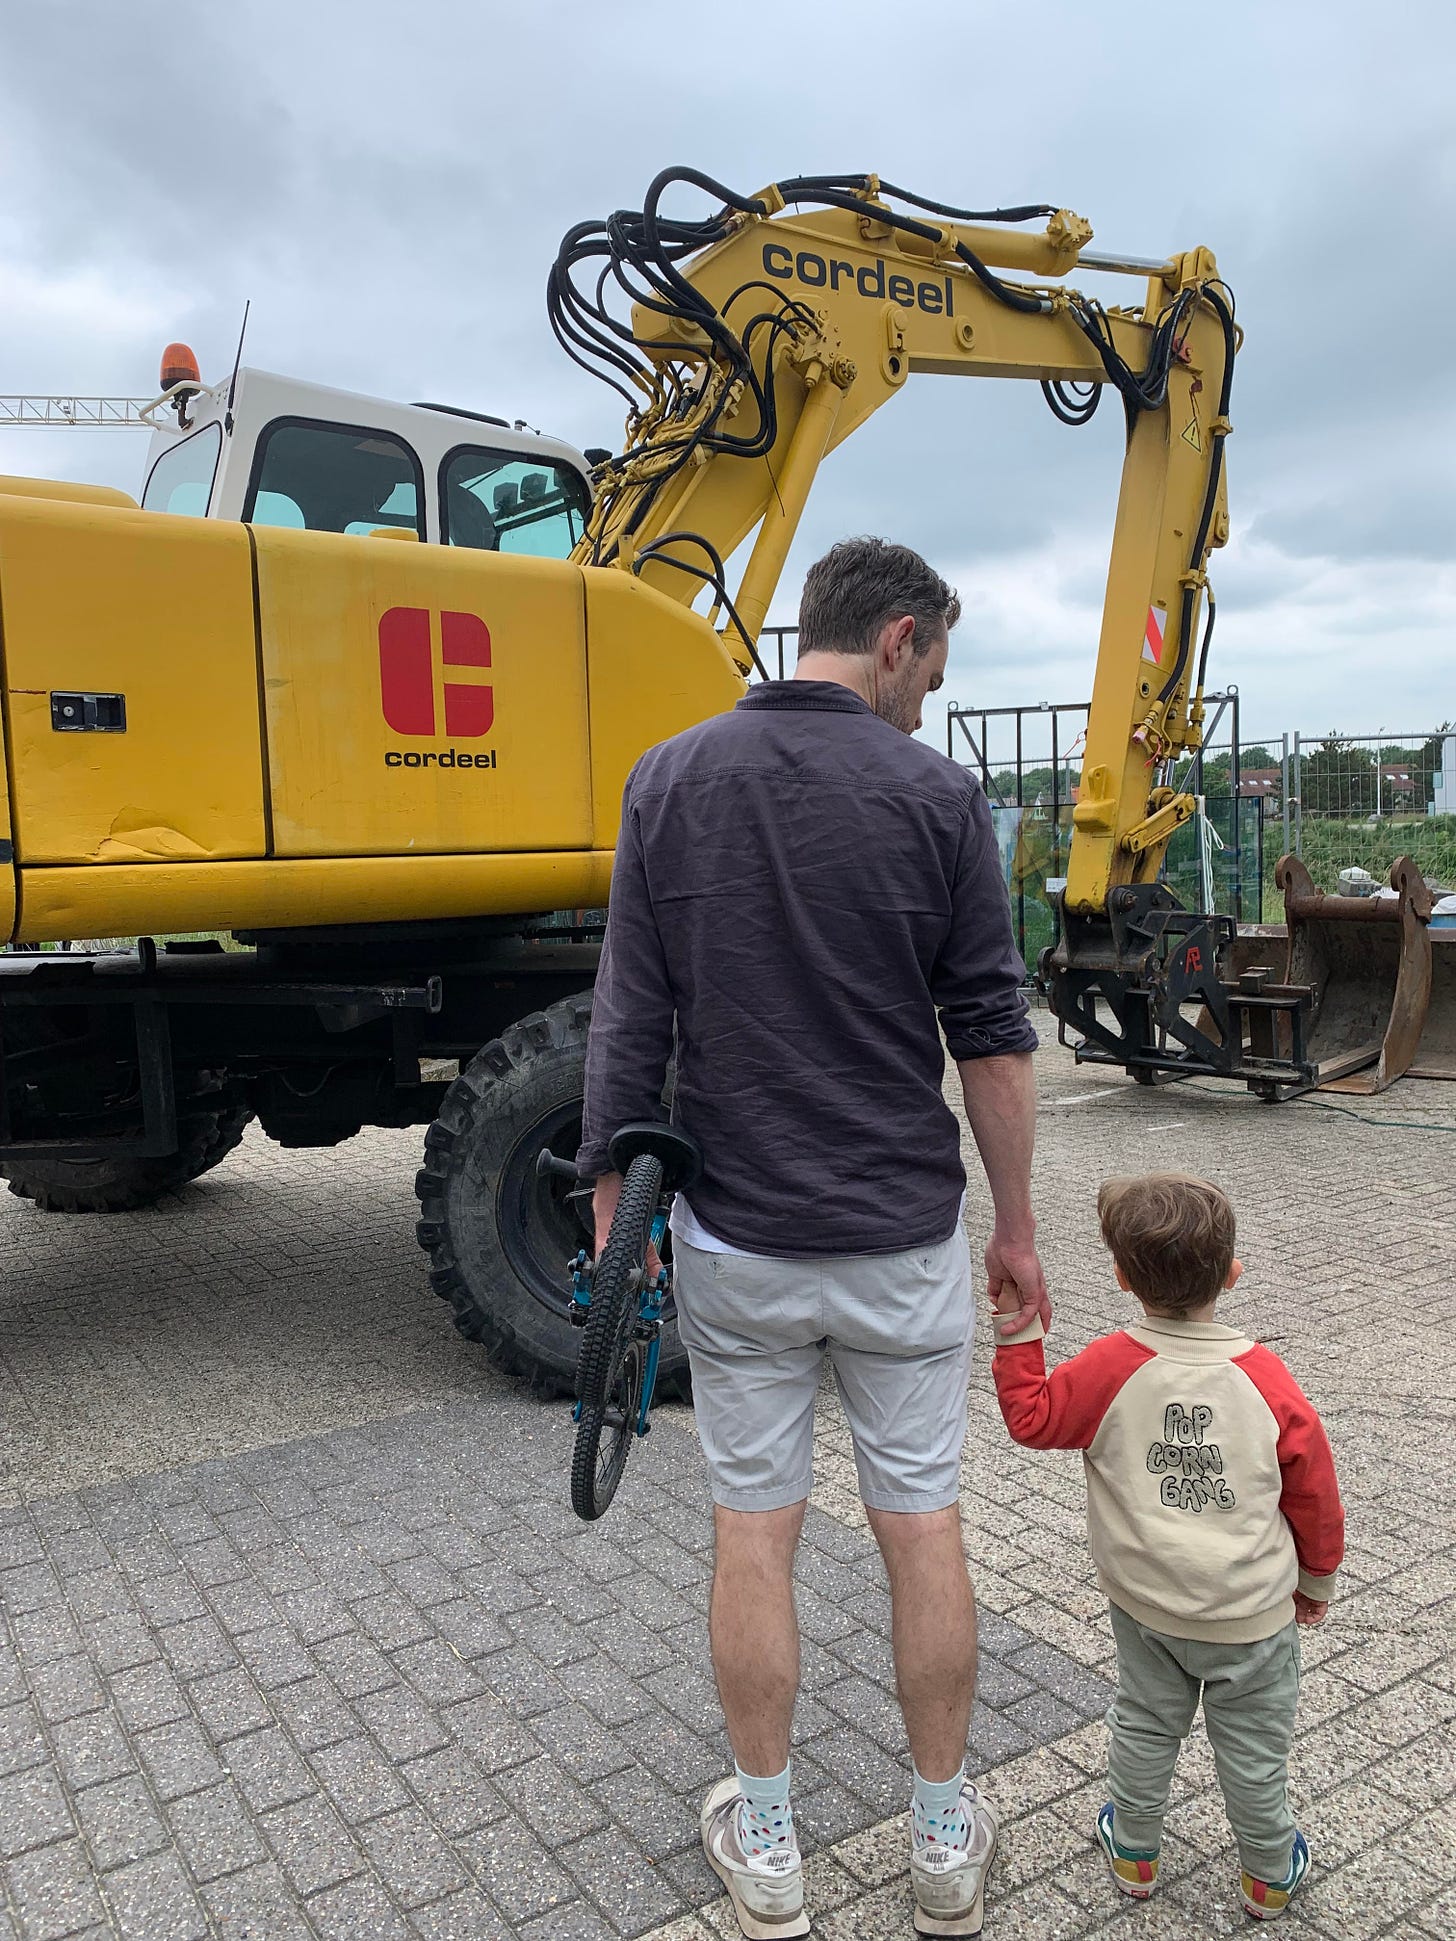 A photo of a boy and his son looking at a large yellow digger.